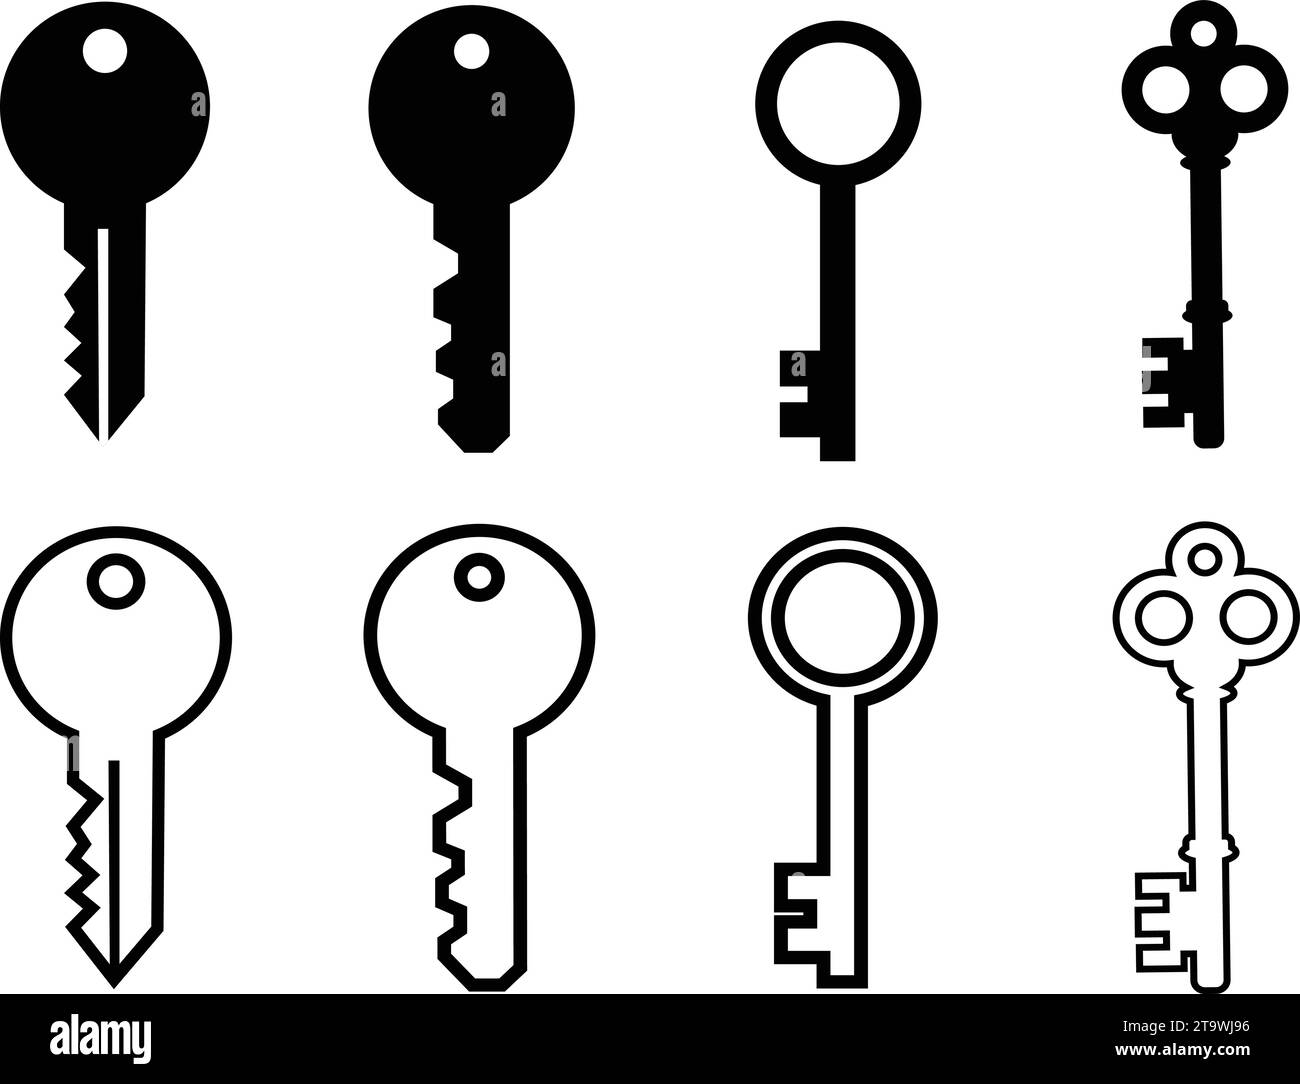 Key icon symbol flat and line style set. Door or house key to unlock lock collection. Security system concept represented by outline and silhouette ke Stock Vector